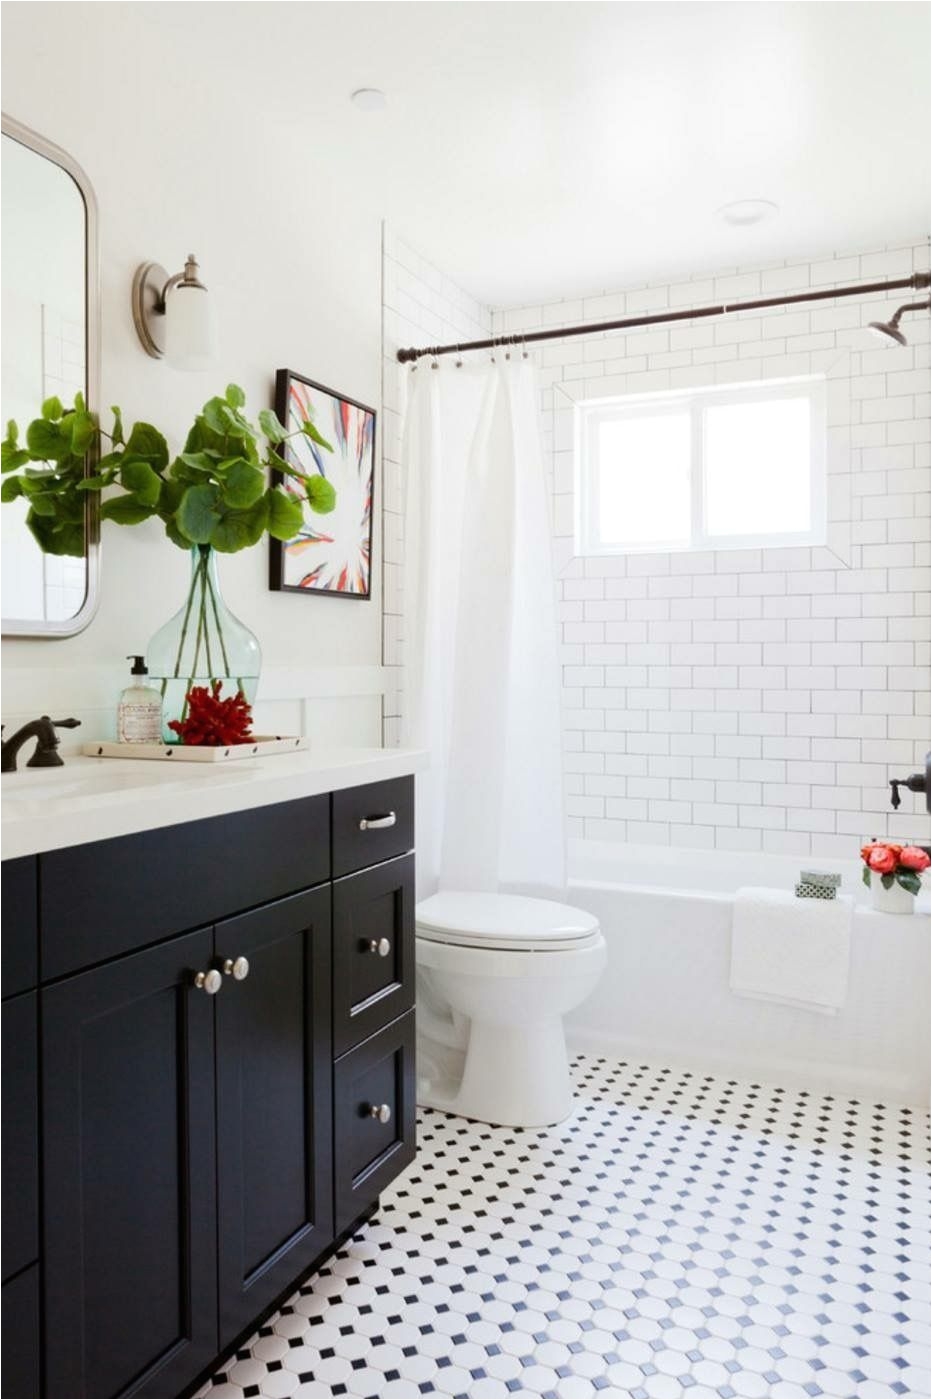 Love how fresh and modern this bathroom feels while still highlighting timeless styles like black tuxedo cabinets white subway tiled walls and checkered